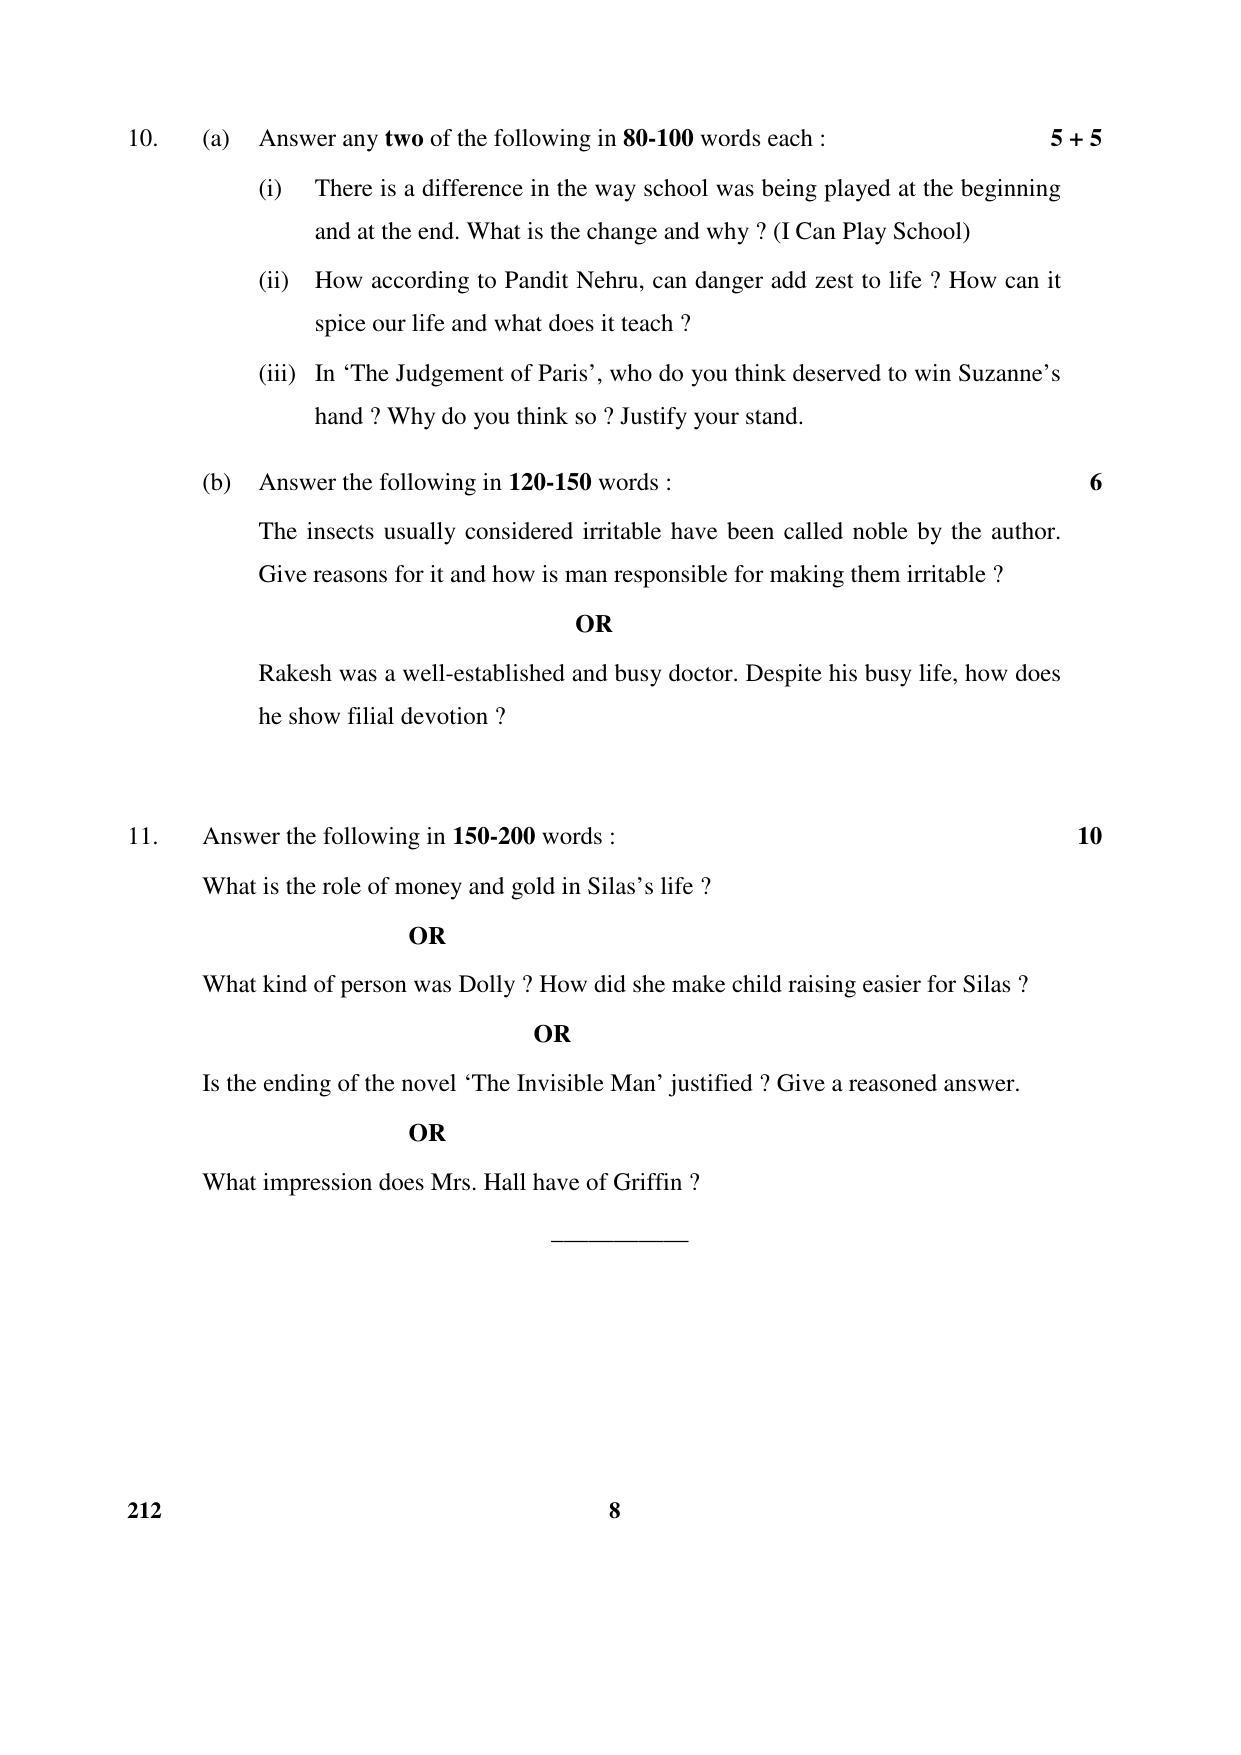 CBSE Class 12 212 _English (Elective) 2017 Question Paper - Page 8